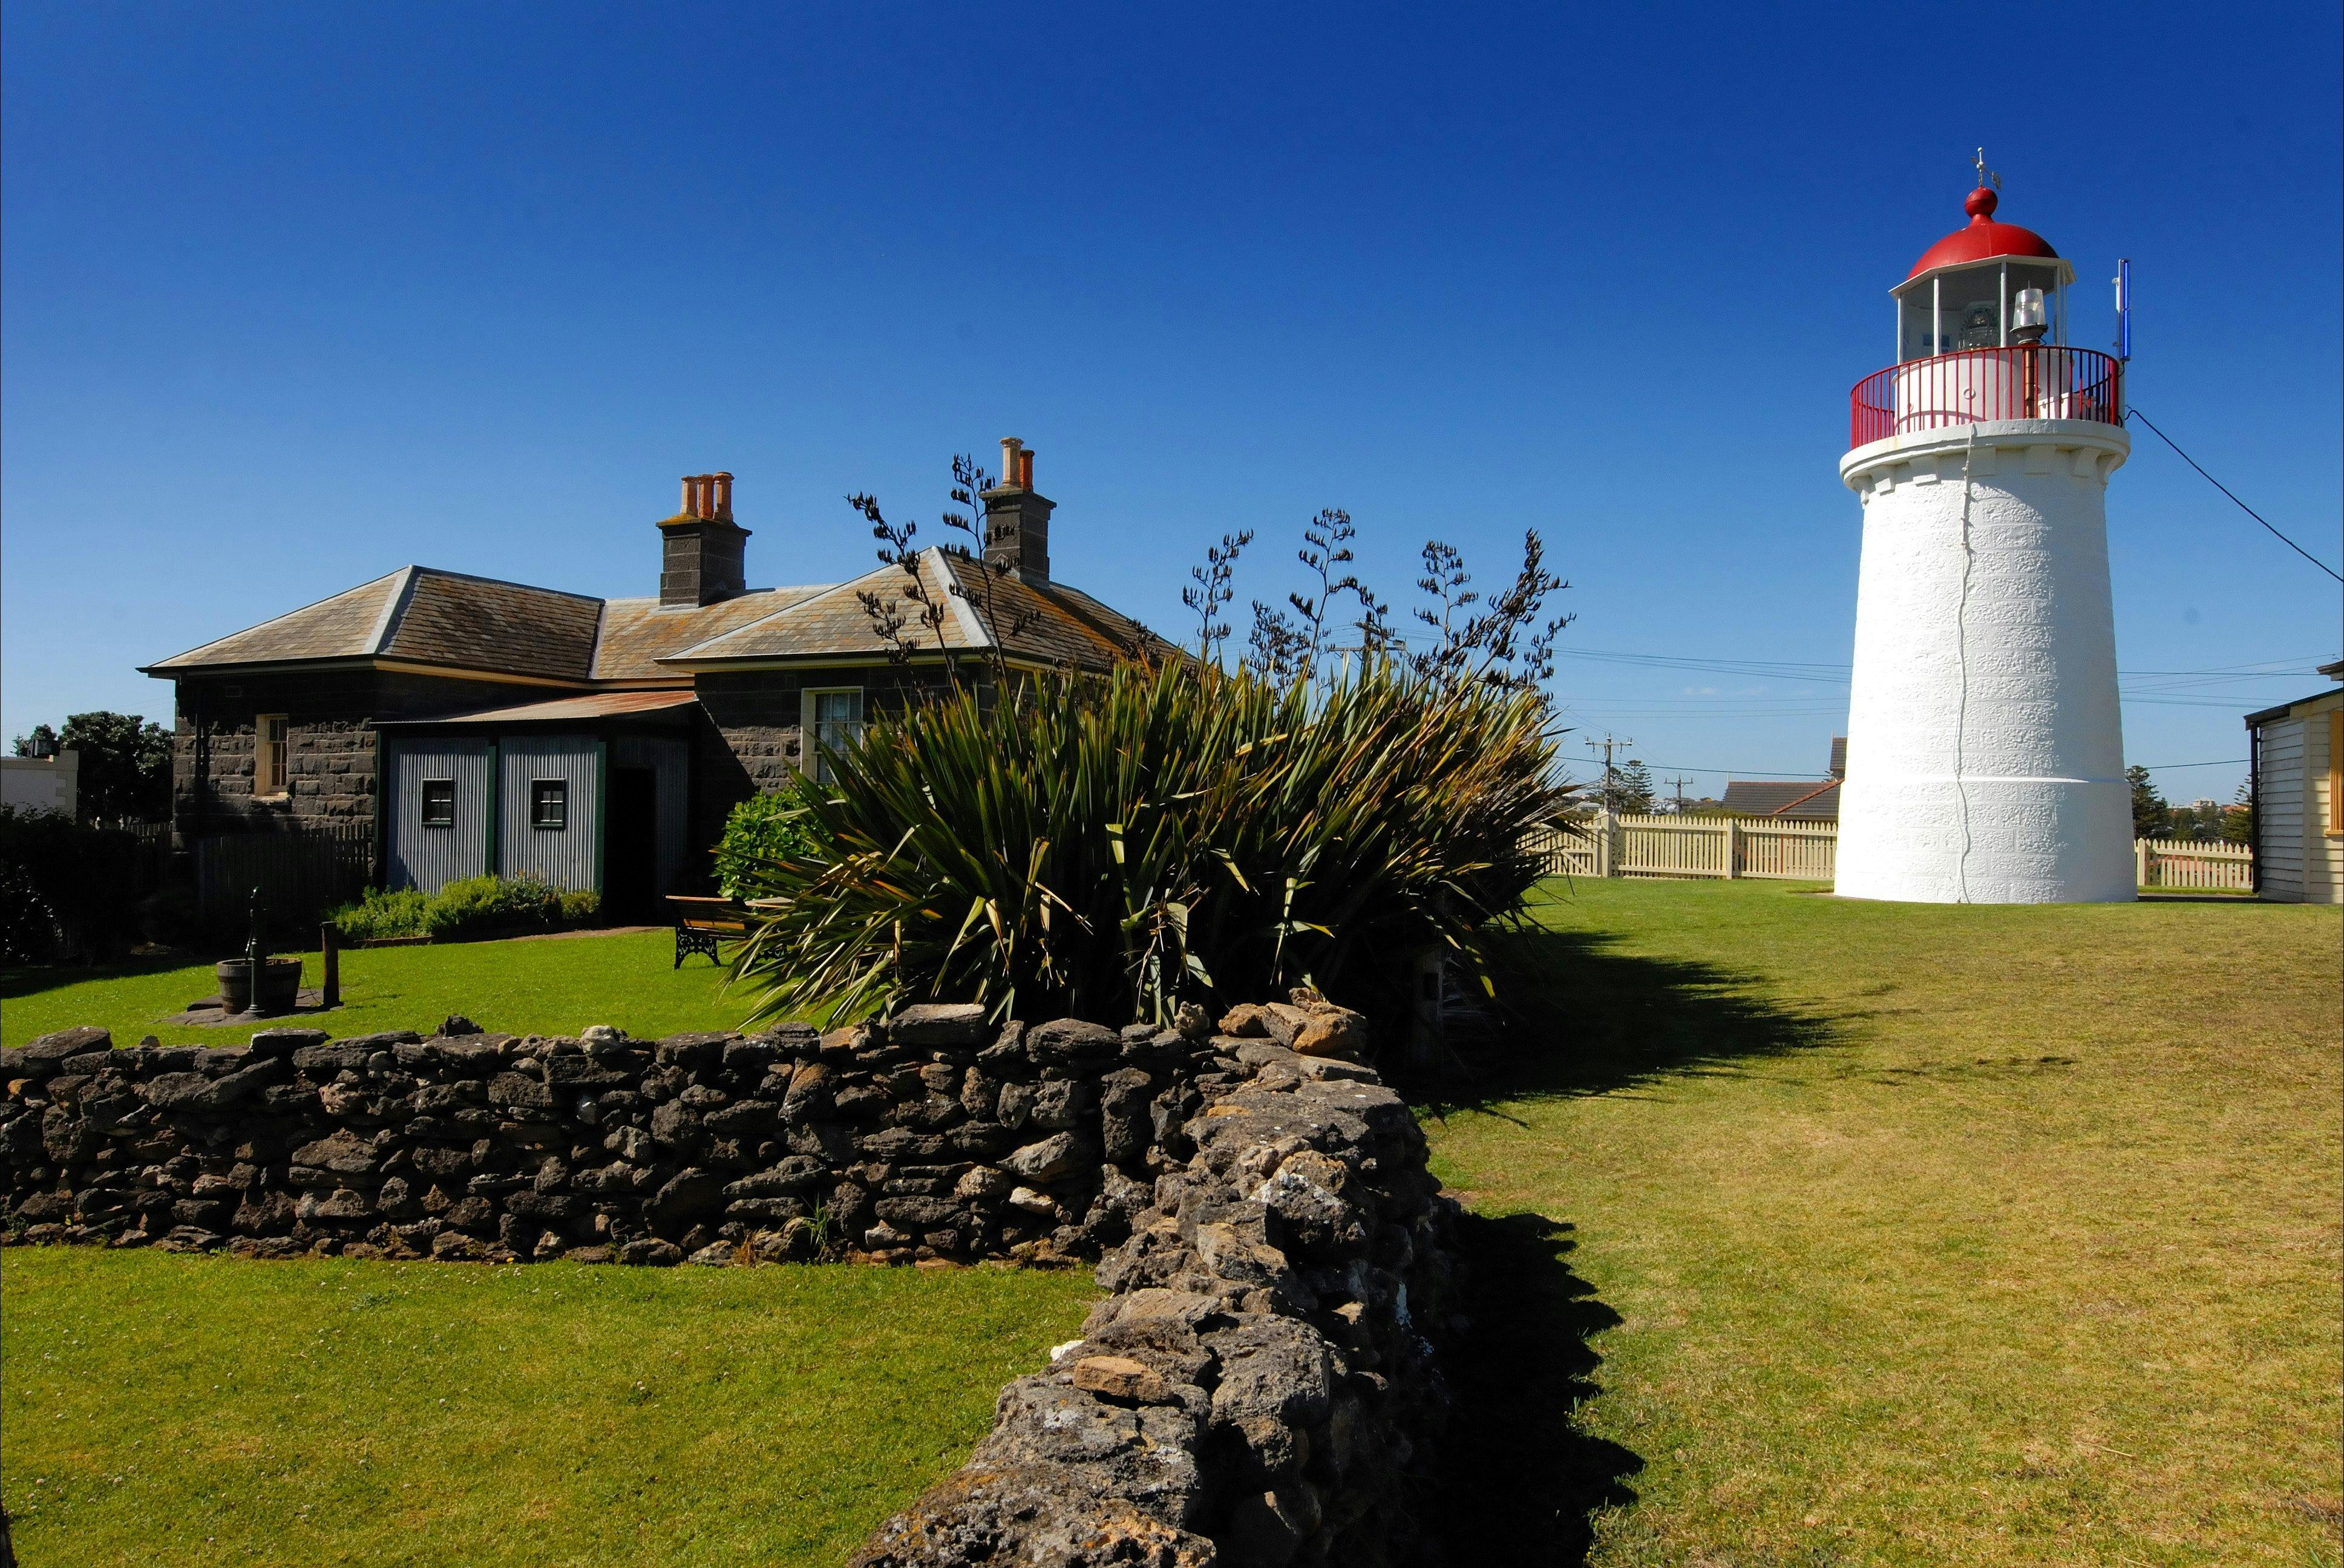 Flagstaff Hill Maritime Museum and Village